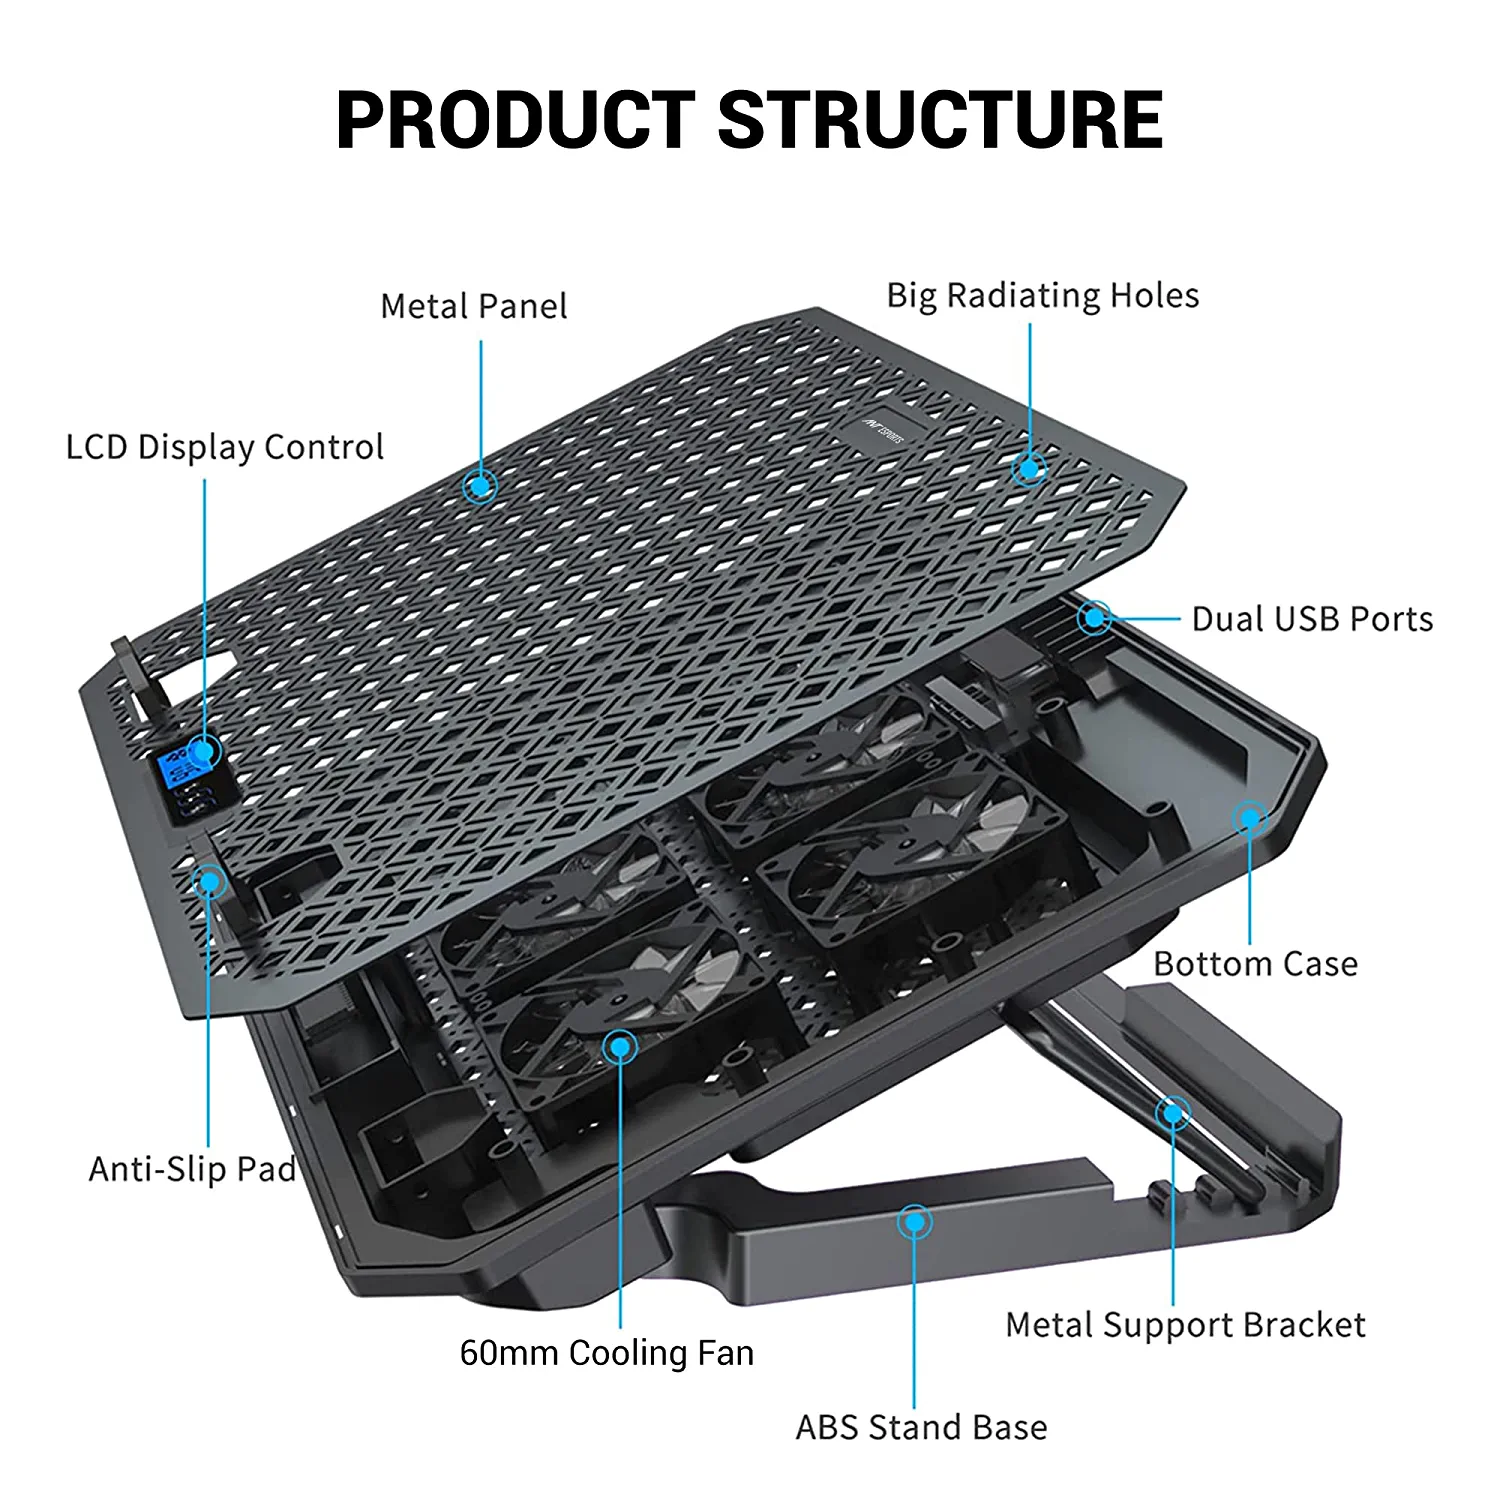 product structure of ant esports cooling fan